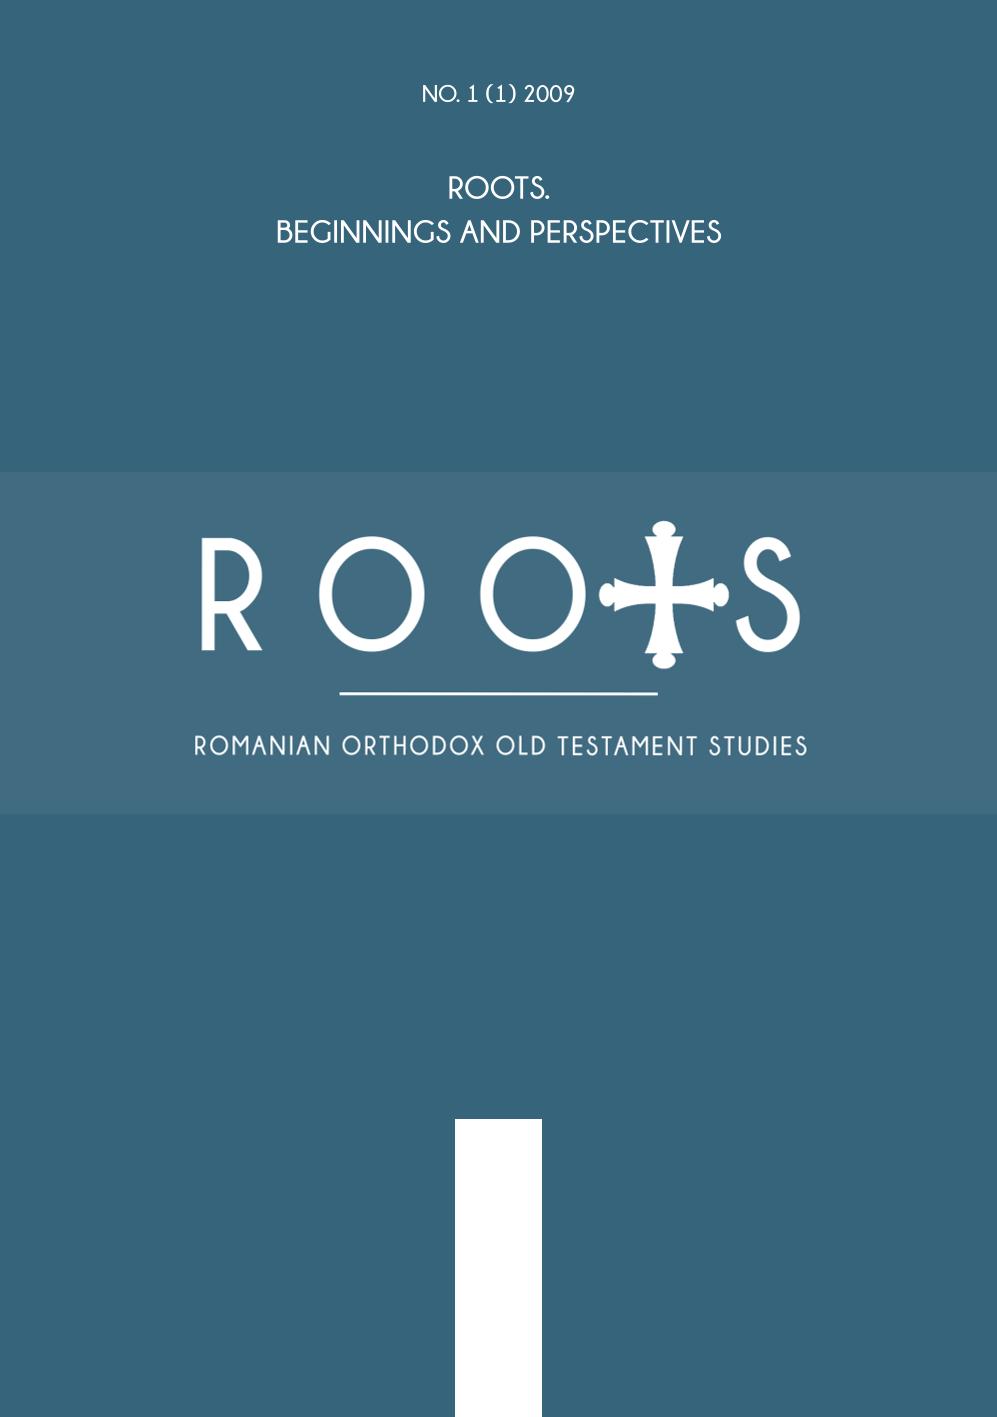 					View Vol. 1 No. 1 (2009): ROOTS - Beginnings and Perspectives
				